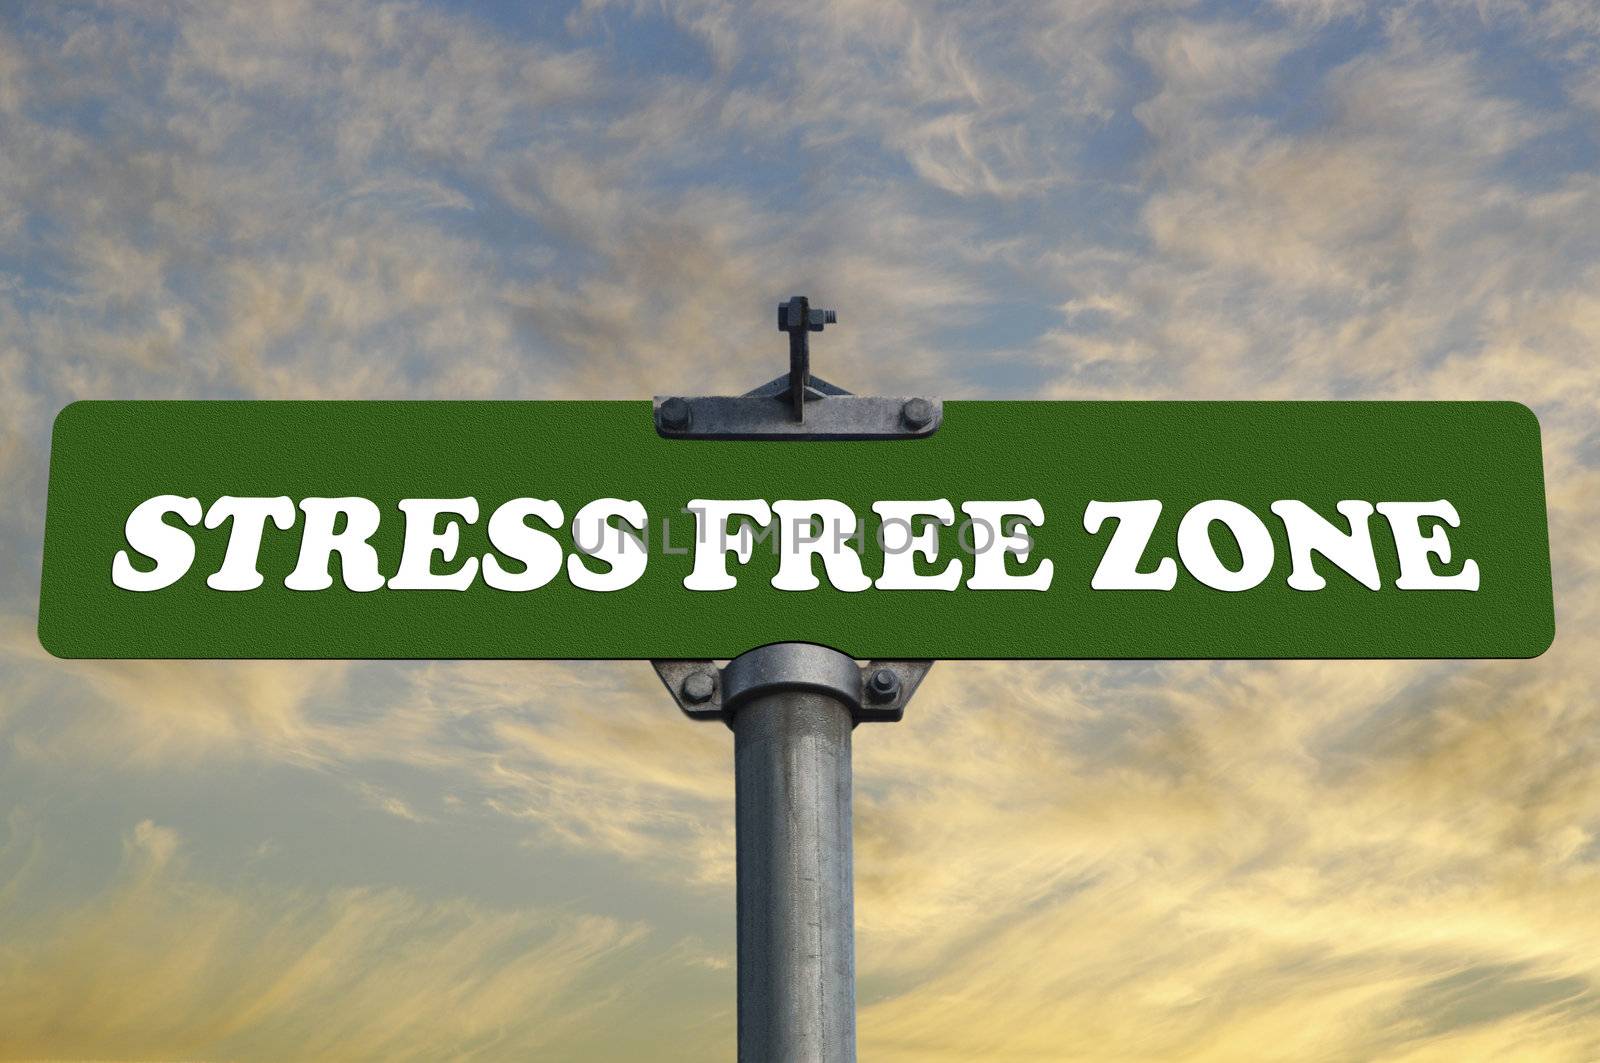 Stress free zone road sign 